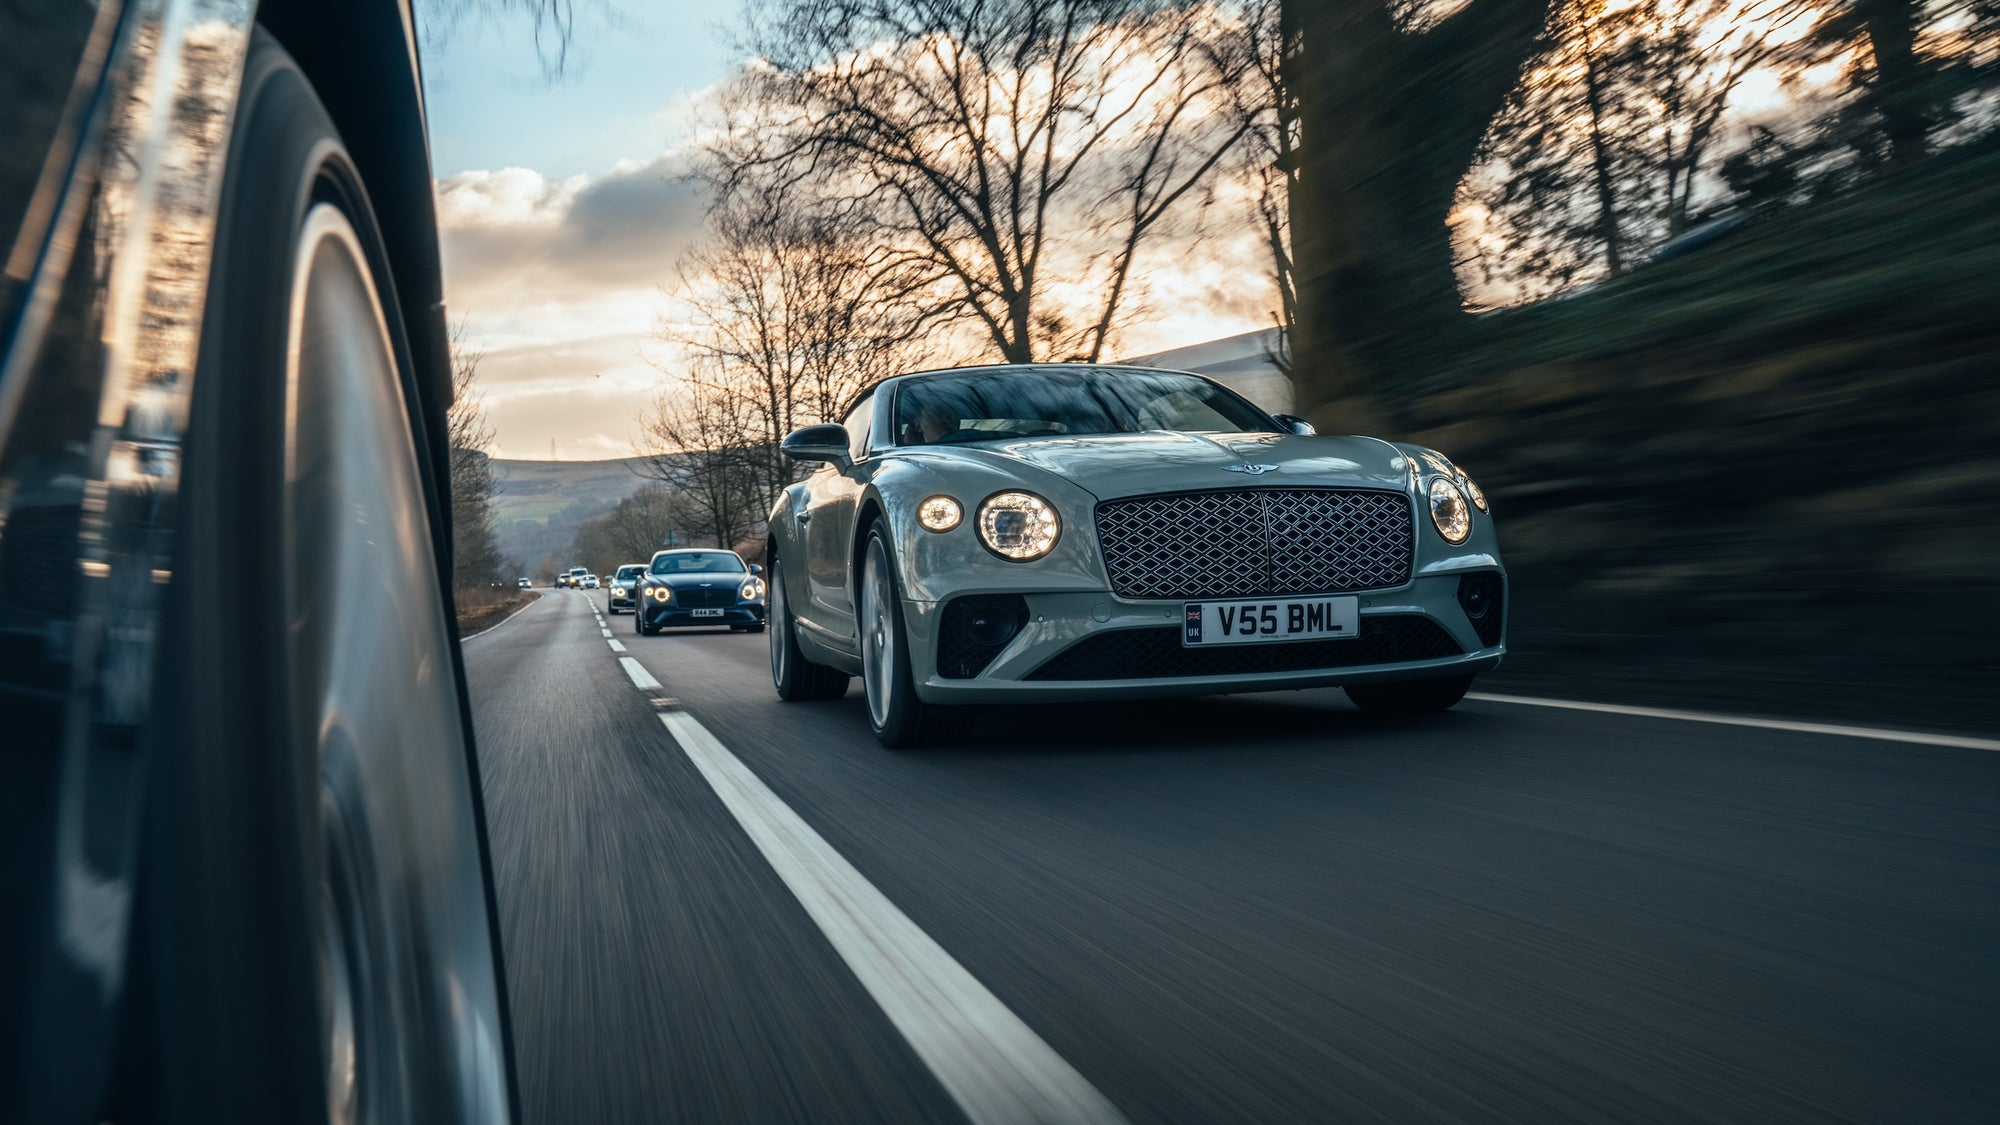 The final journey of the Bentley W12: an unforgettable masterpiece.